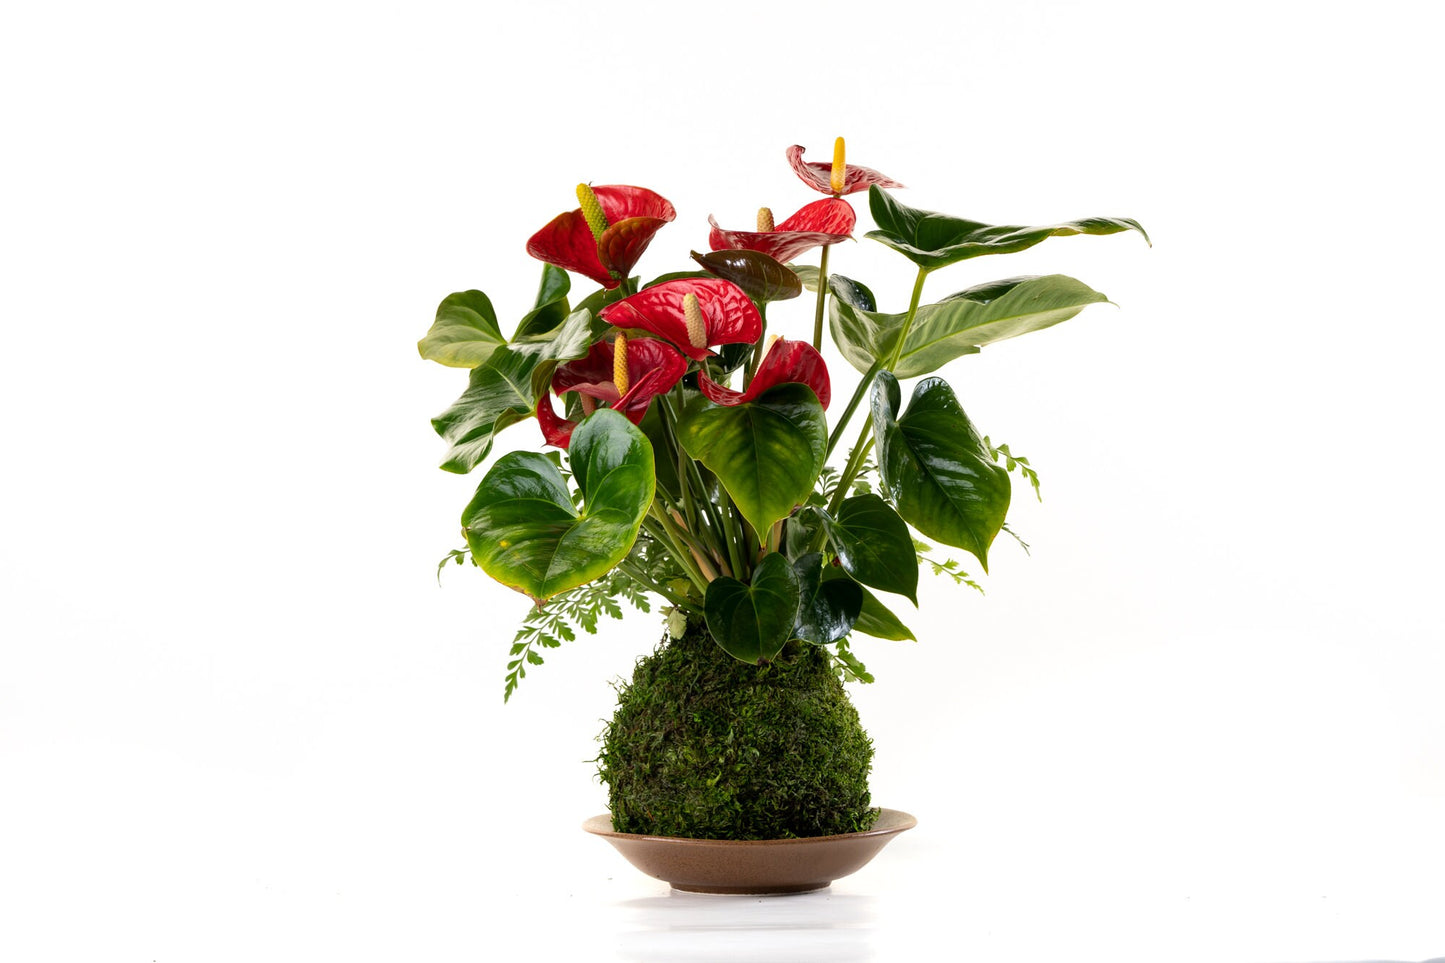 Large- Anthurium and Fern kokedama -- Bonsai Moss ball -  house decor with Japanese technique plants!